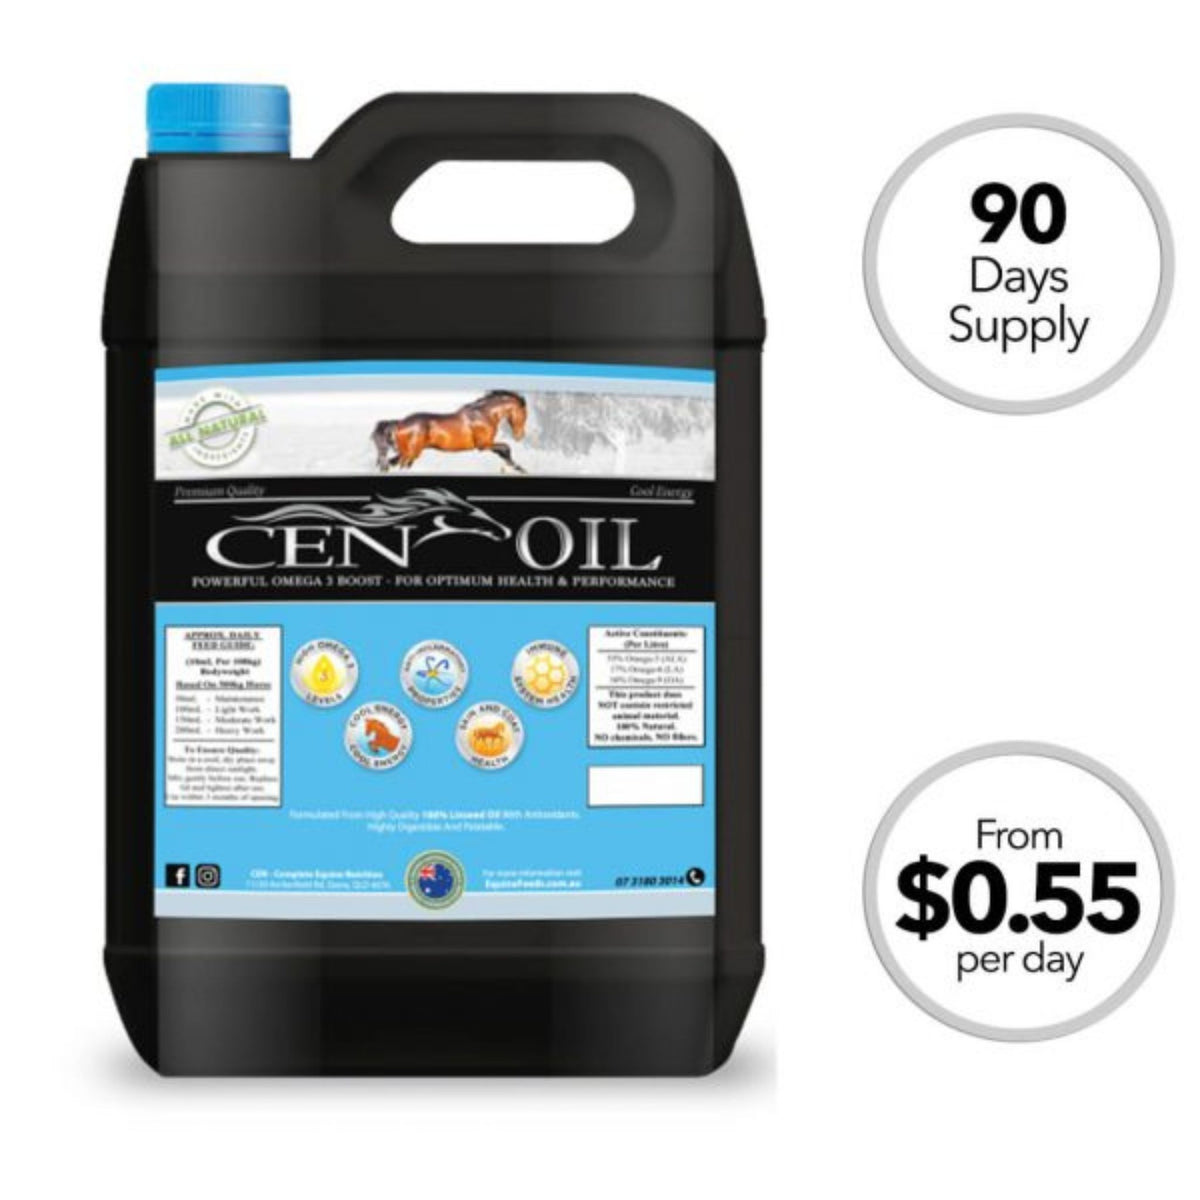 Black tub of CEN oil with 90 day supply noted.